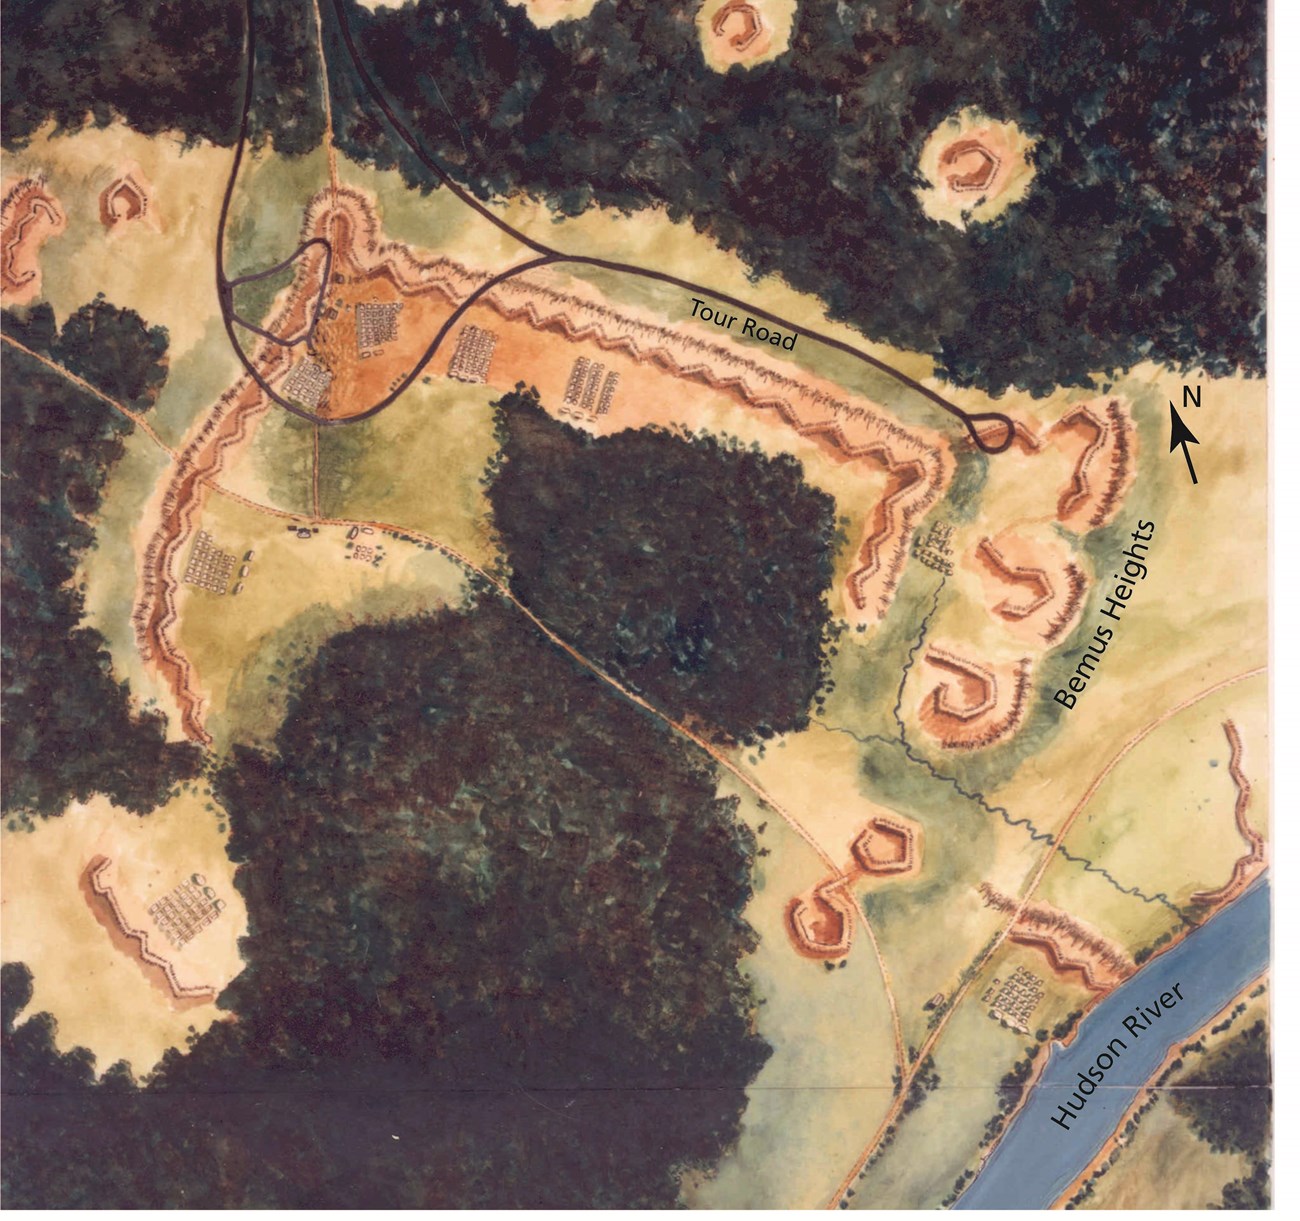 Historical map of Bemus Heights. North is to the upper left, the hudson is on the bottom right of the map.